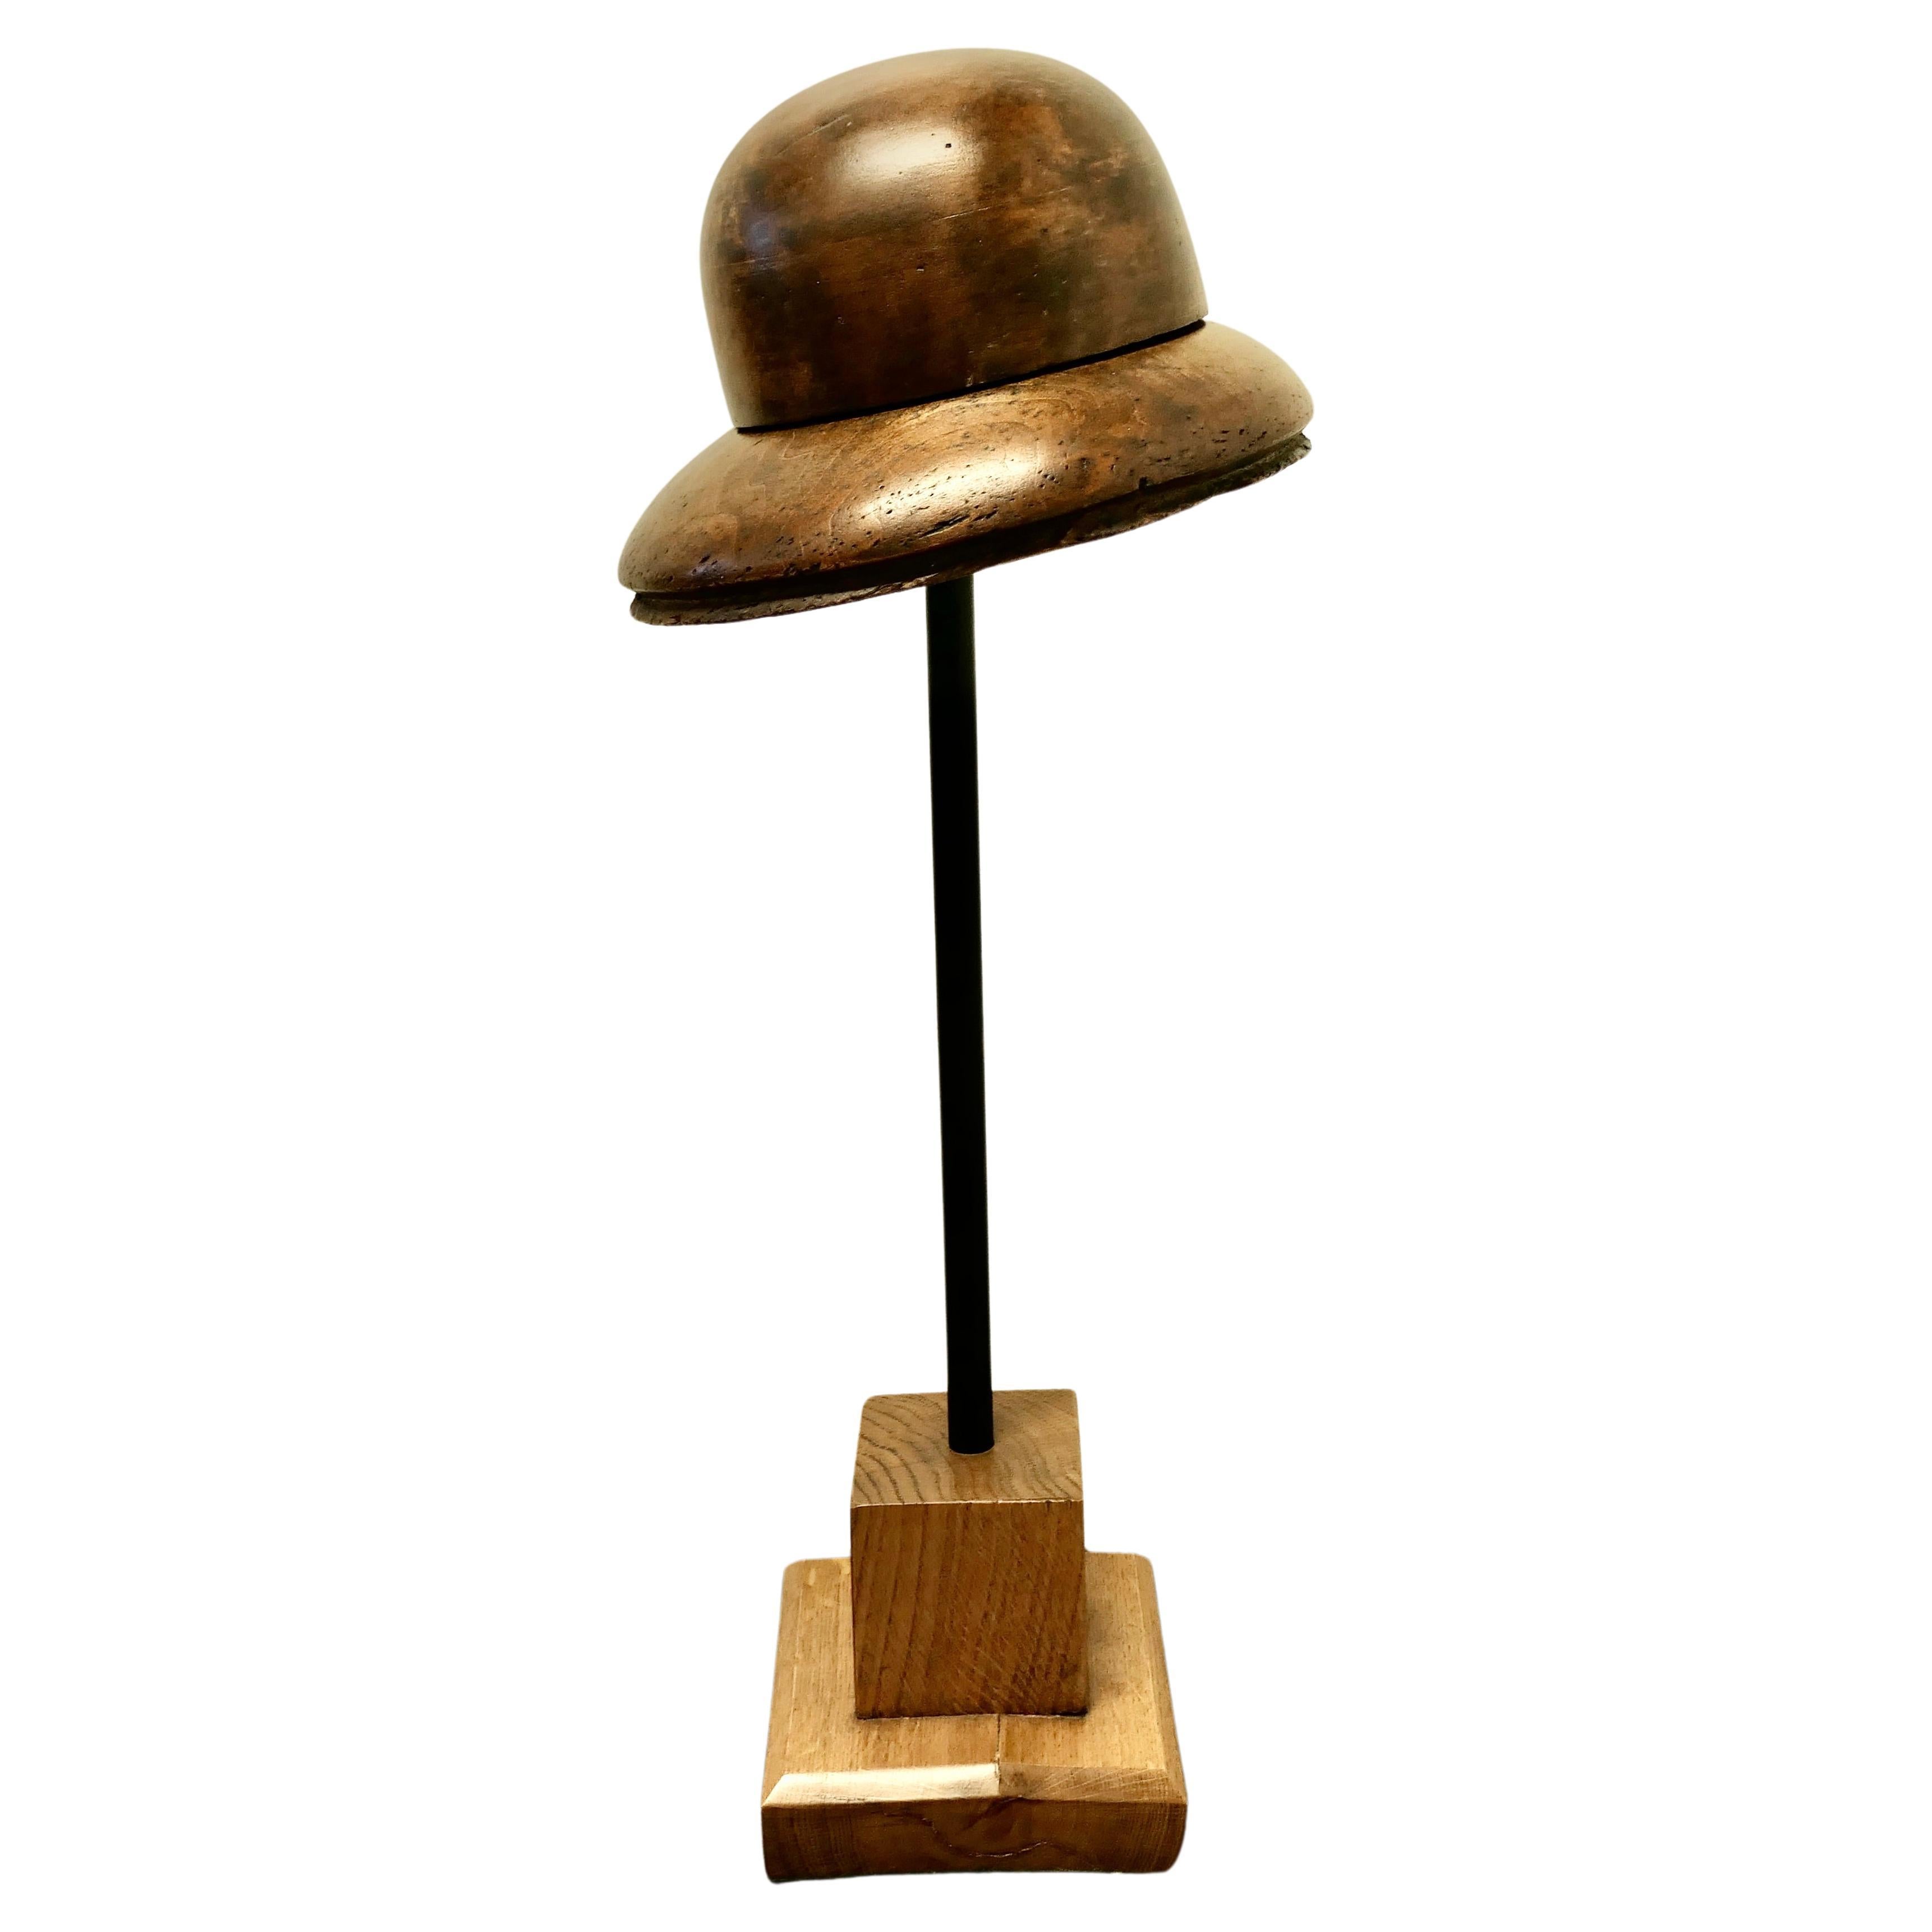 French Fruit Wood Hat Display Stand  This is a form for a 1920s Deep Brim Cloche